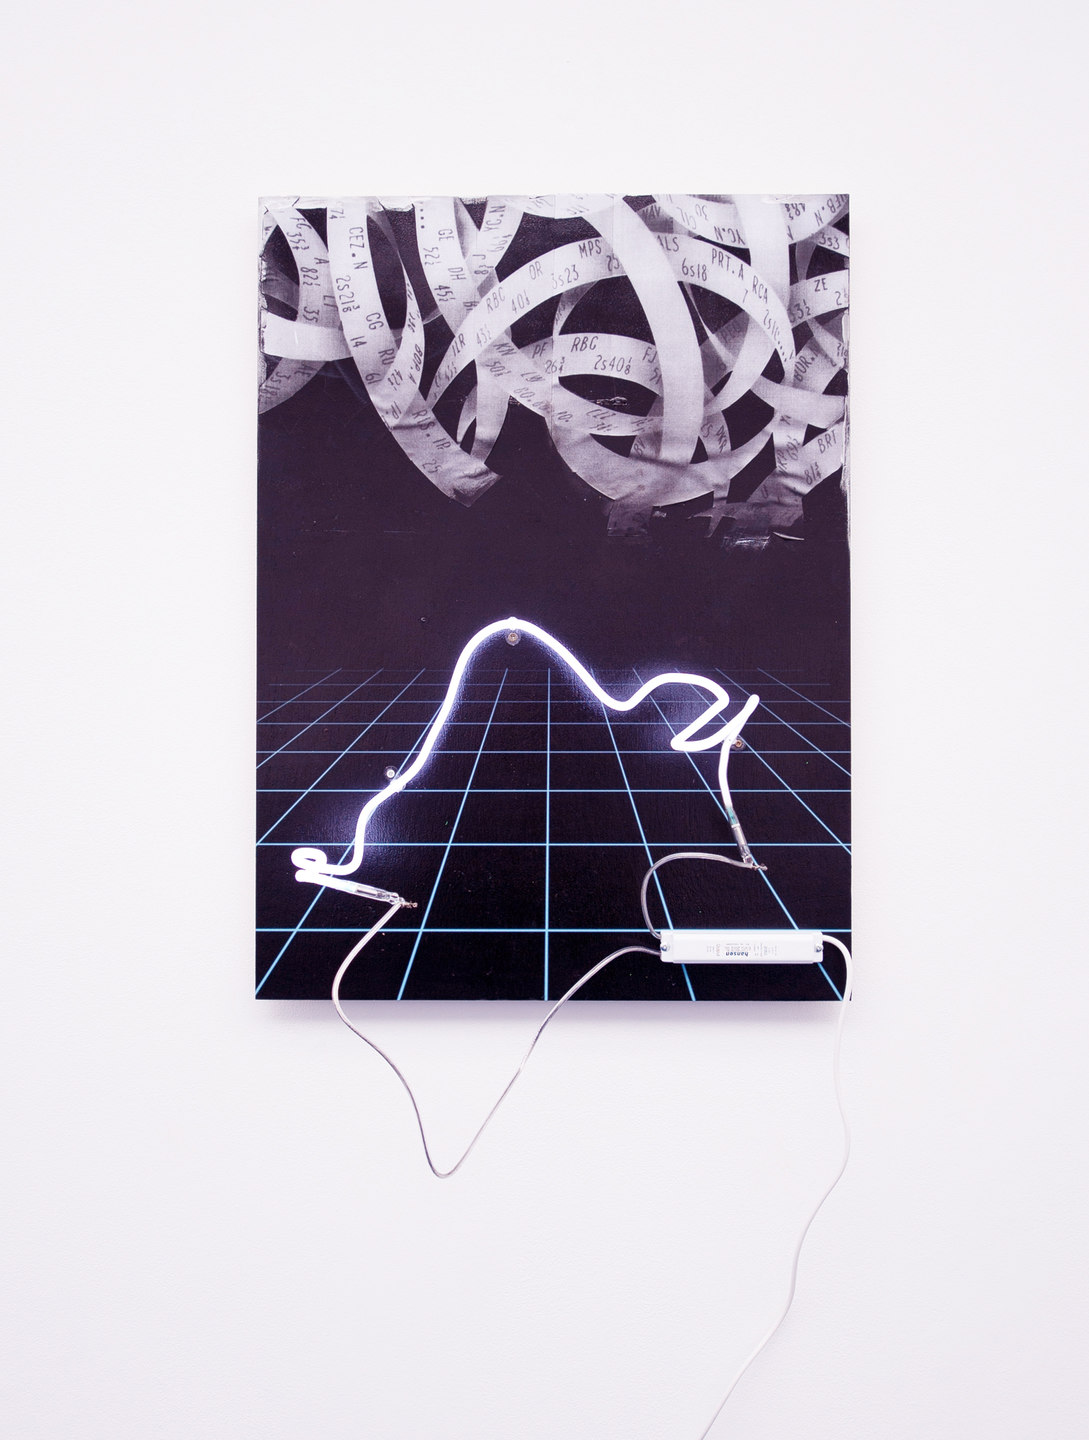 Florian Auer, Not Yet Titled (Ticker Tape), 2013, print on black board, paper, airbrushed paint, neon, transformer, (80 x 59 x 23 cm)